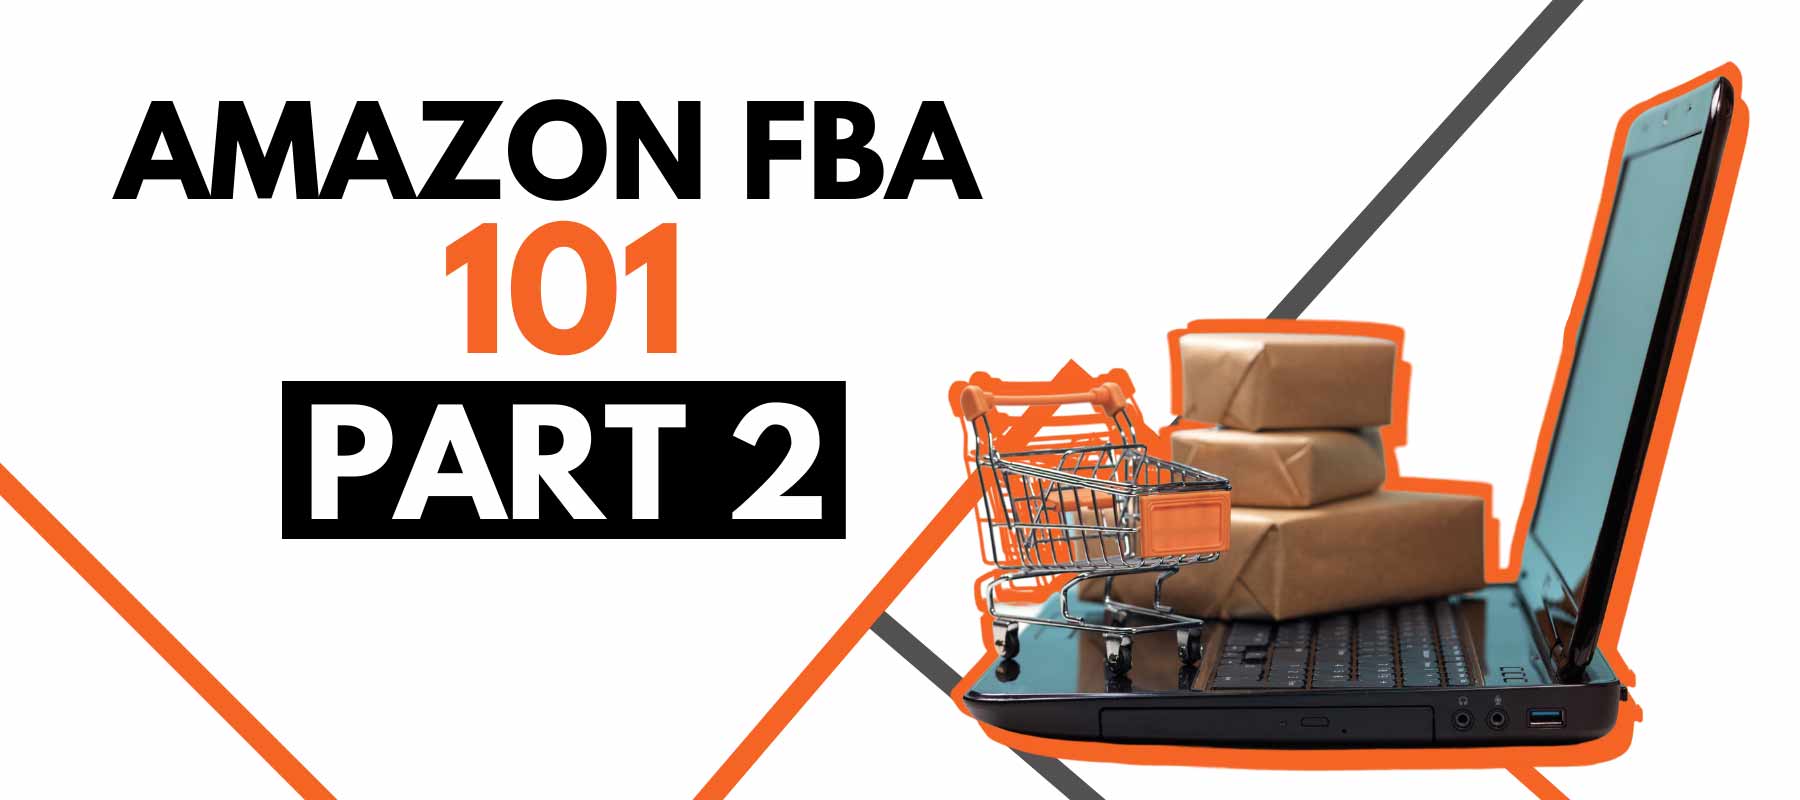 Amazon FBA 101 Part 2 | Product Research & Launching Strategies